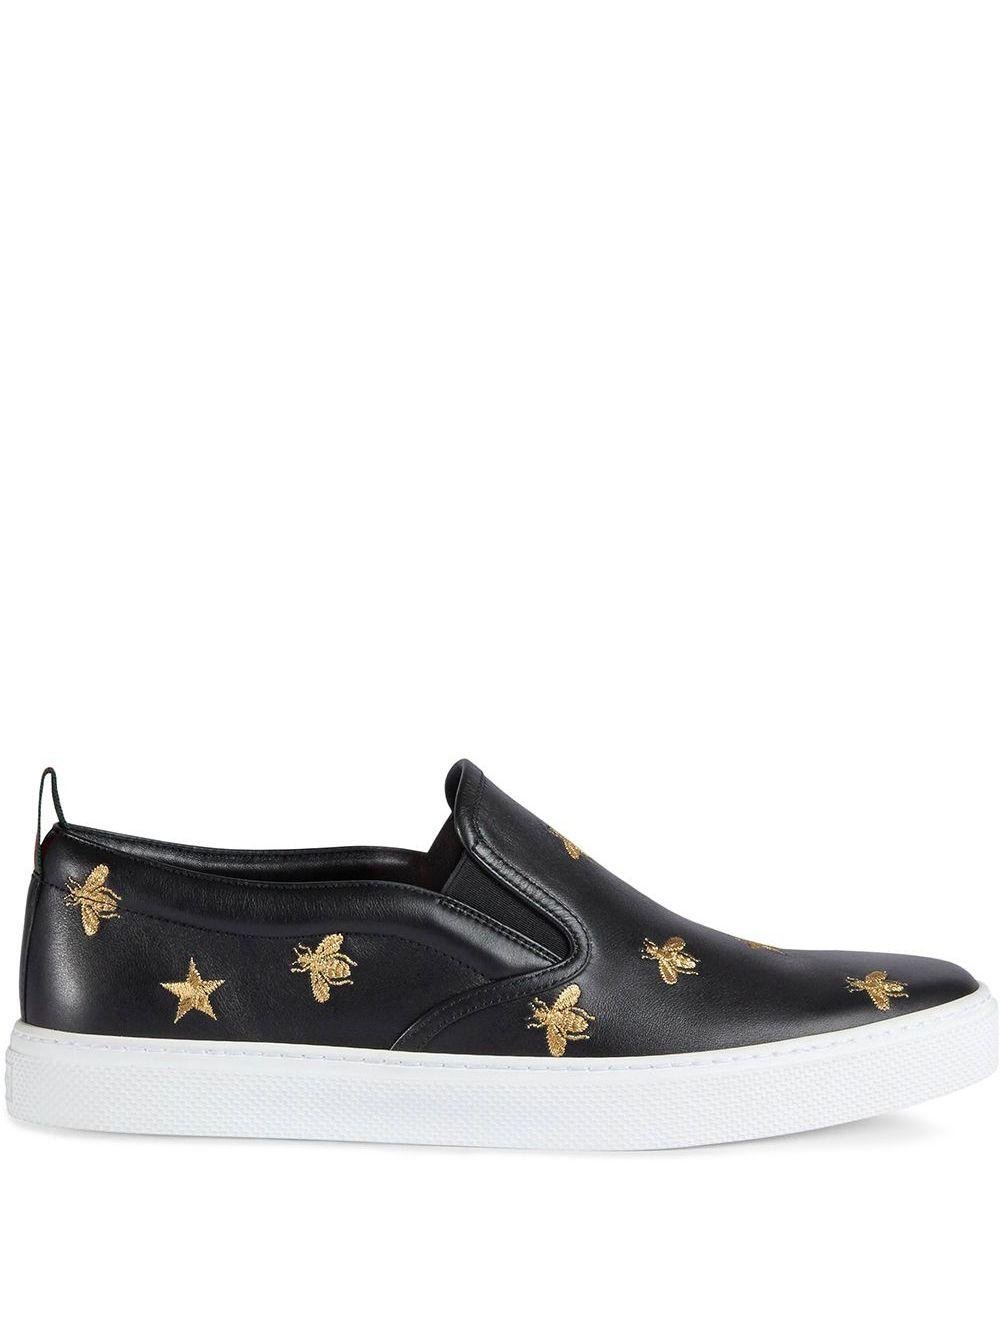 Gucci New Ace Bee Star Leather Trainers in Black for Men